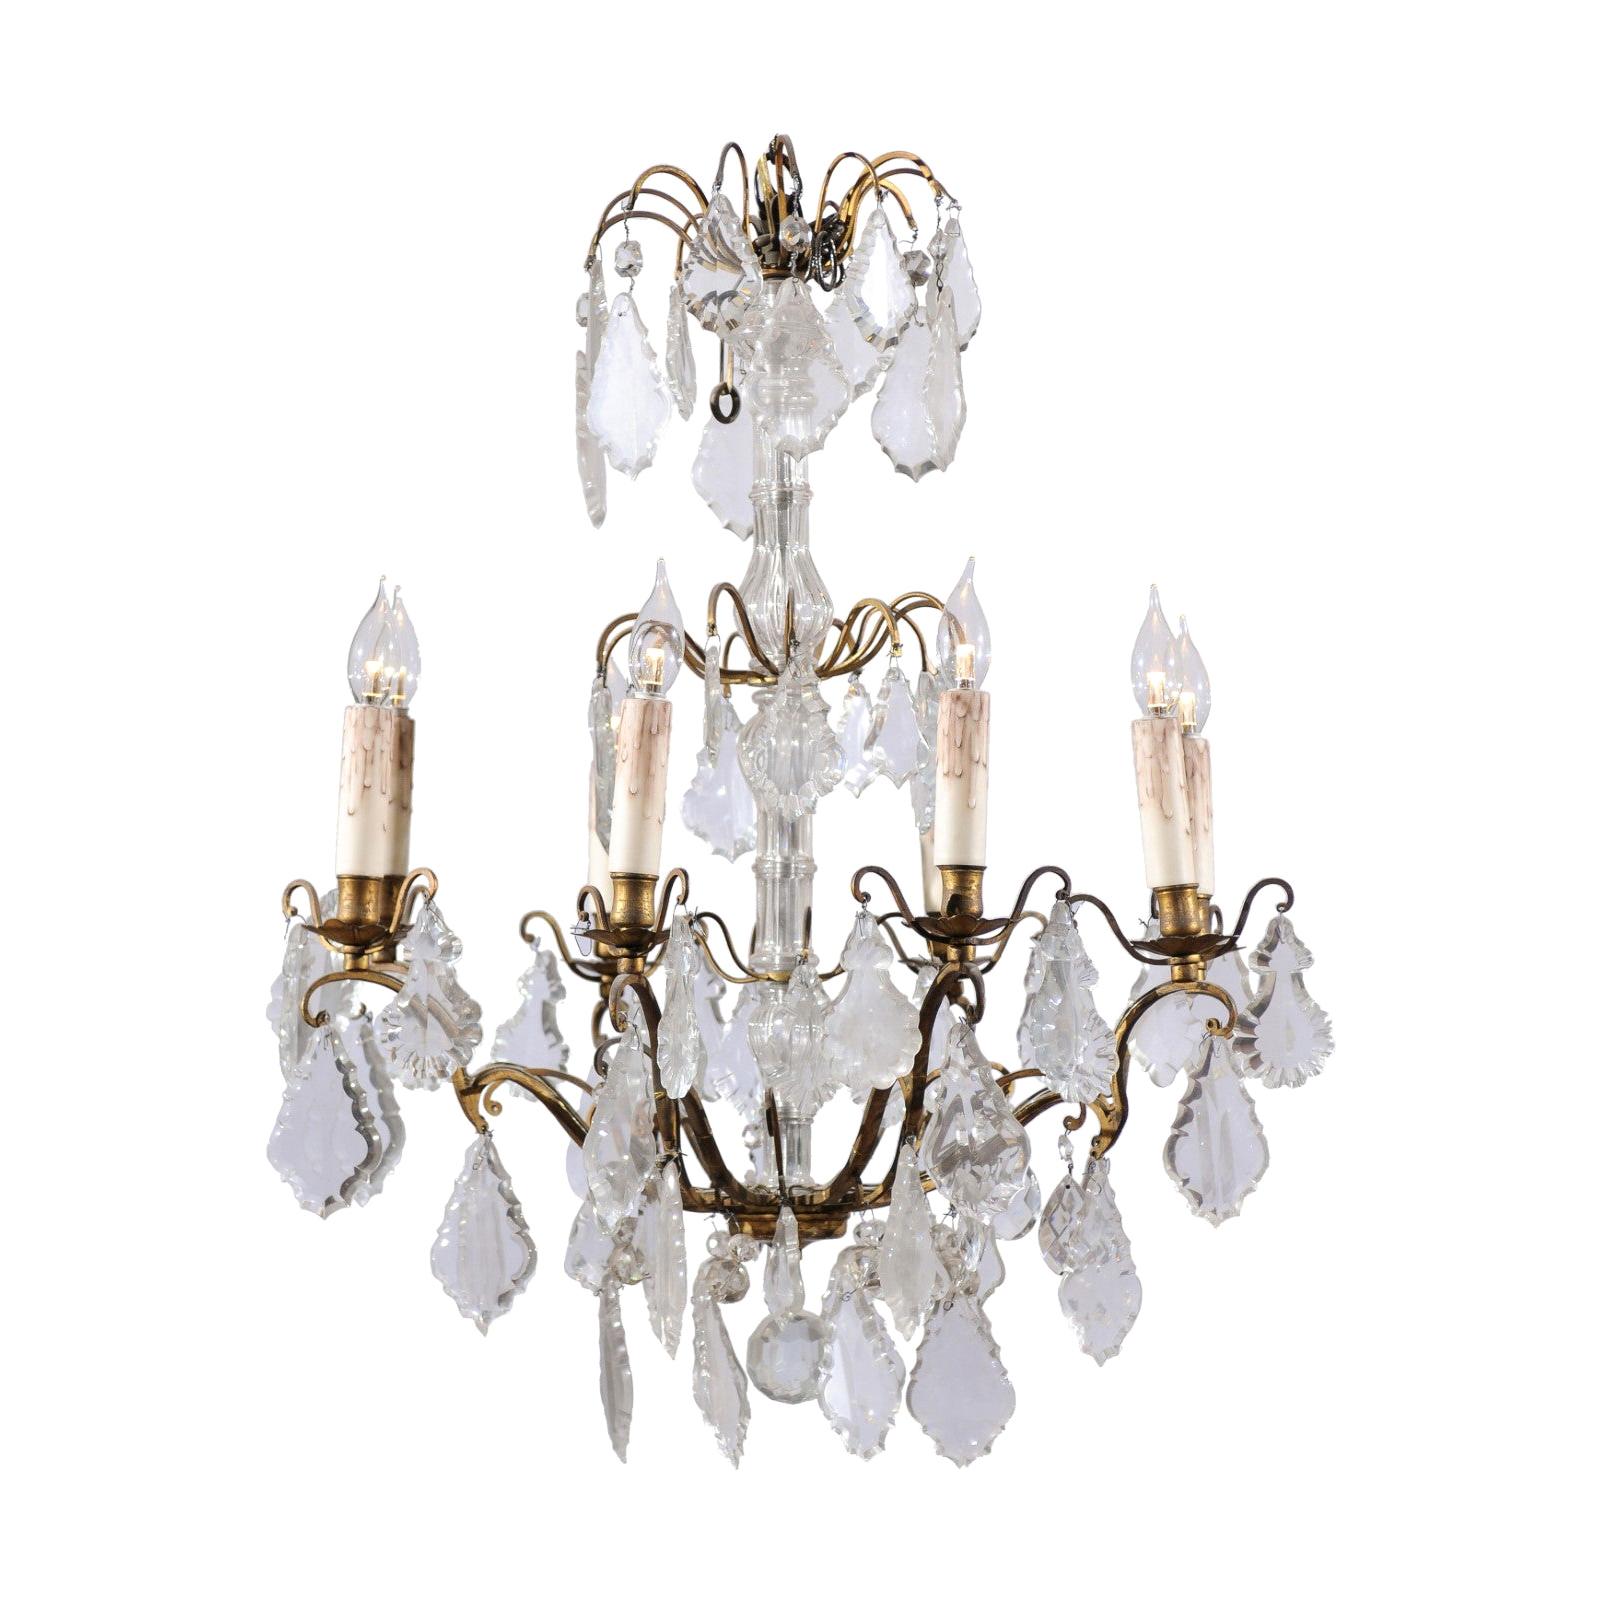 French 1860s Napoleon III Eight-Light Crystal Chandelier with Brass Accents For Sale